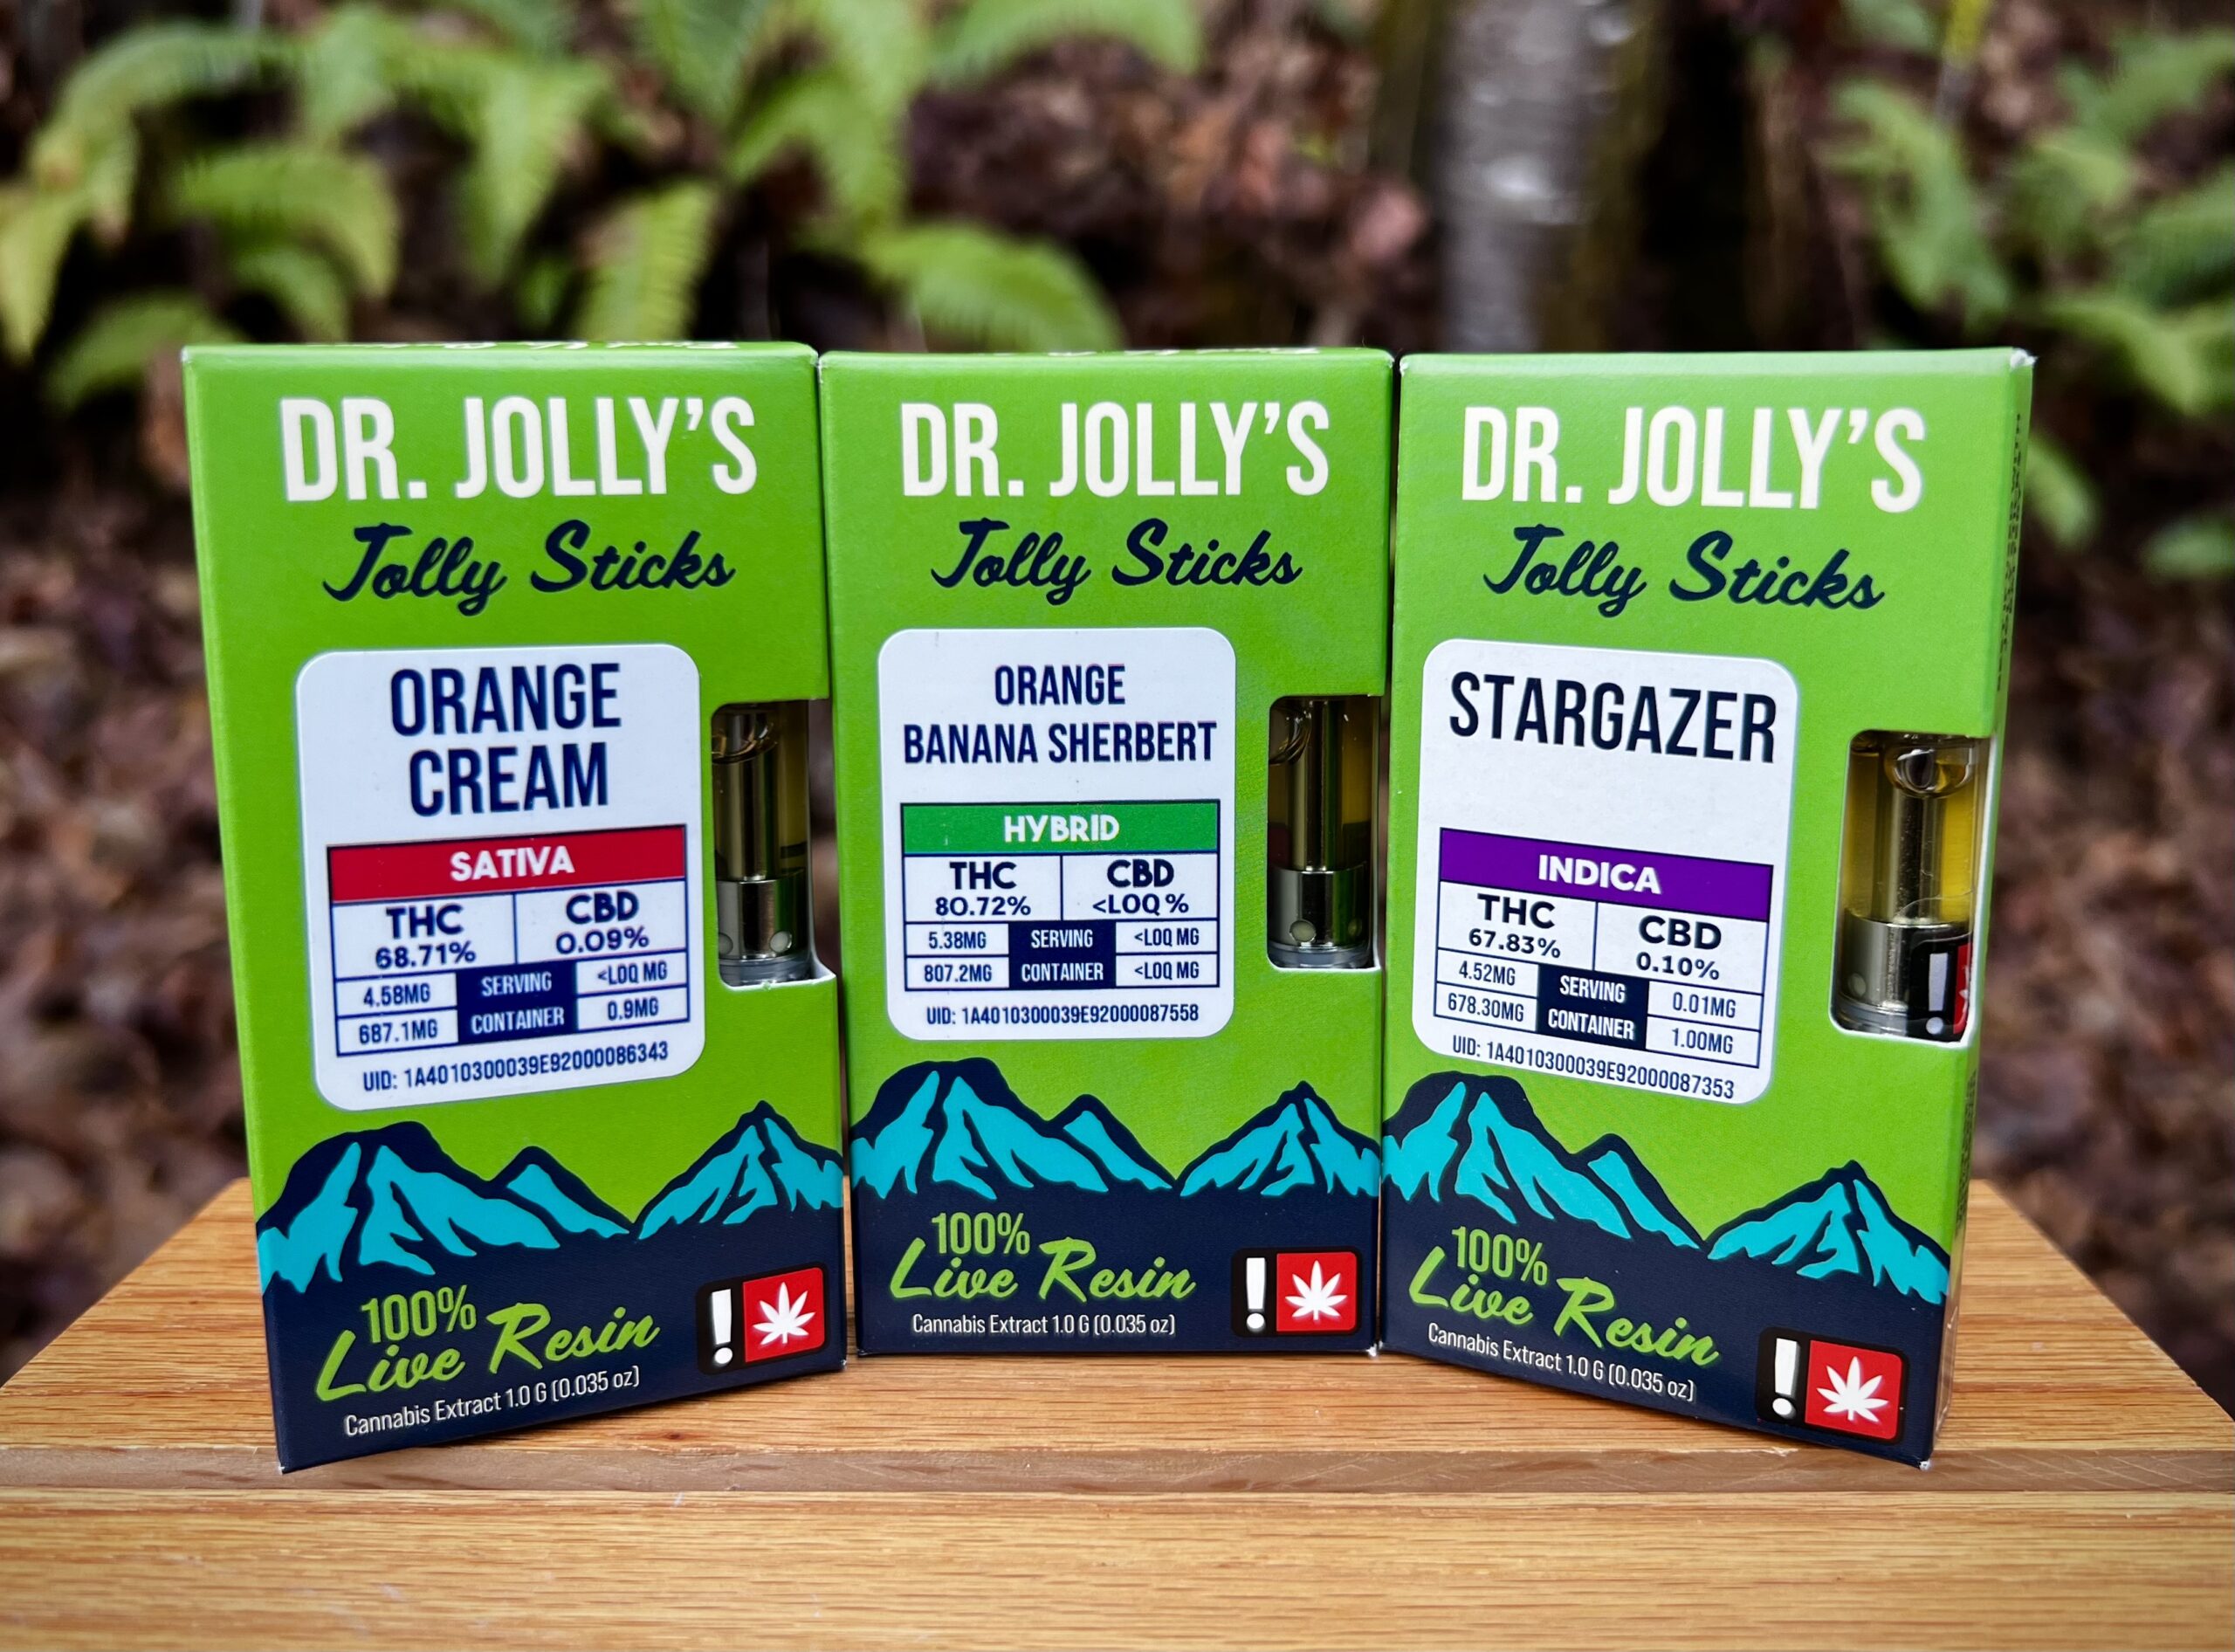 New Product Alert! Dr. Jollys Carts & FECO Have Arrived!